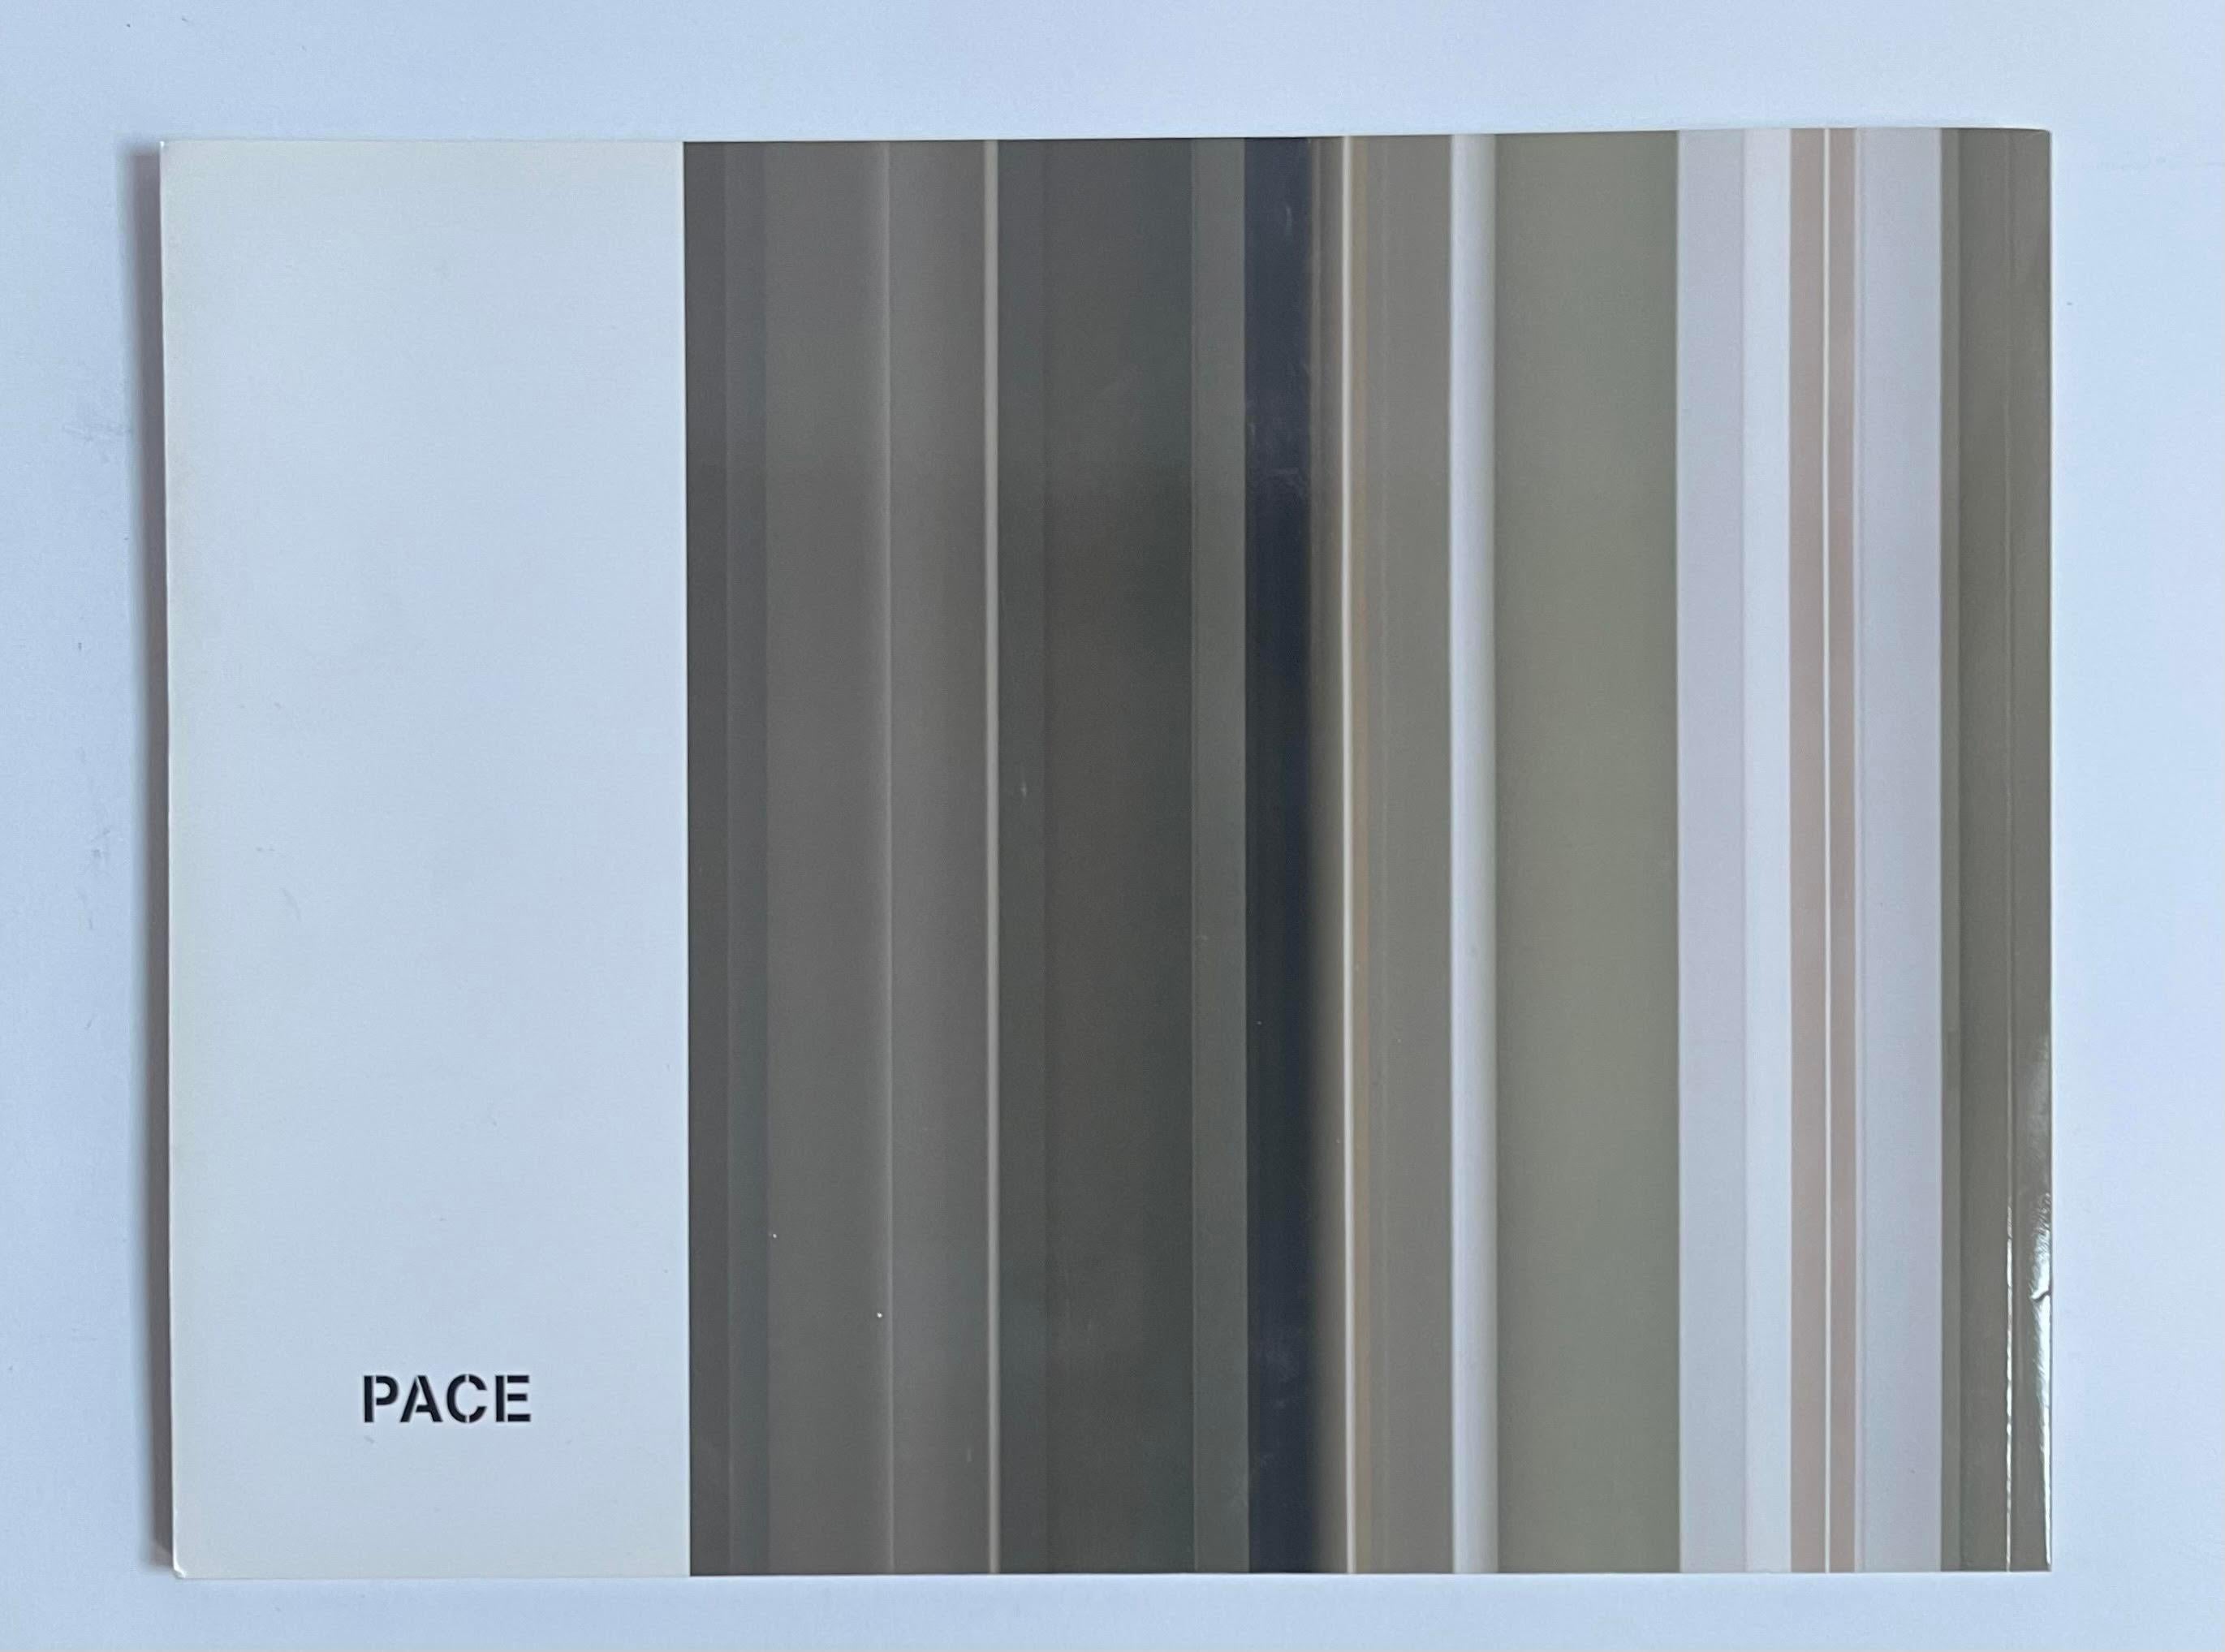 Cacophonous PACE Gallery exhibition catalogue (hand signed by Robert Irwin) For Sale 3